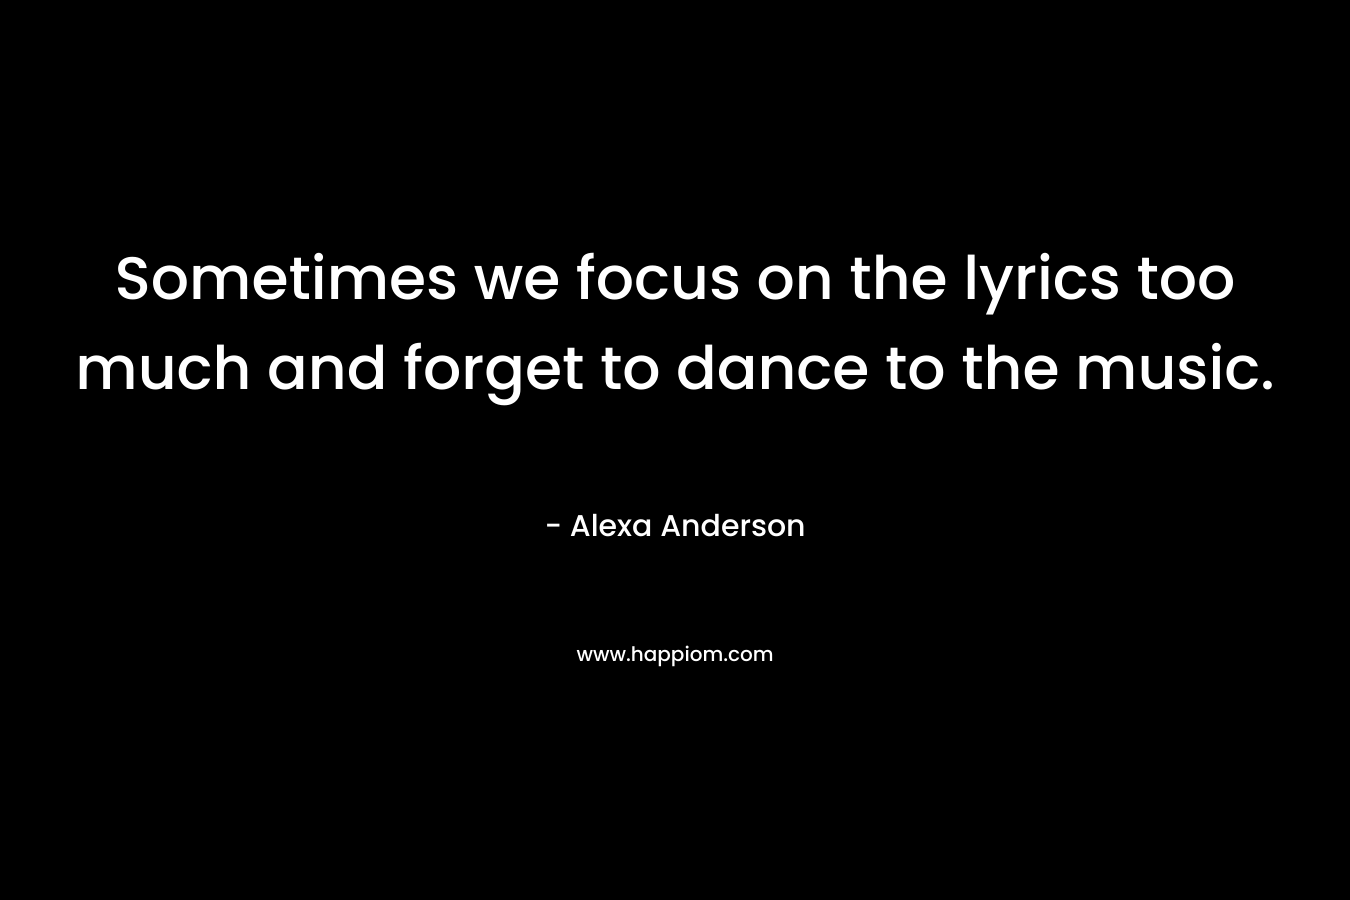 Sometimes we focus on the lyrics too much and forget to dance to the music. – Alexa Anderson